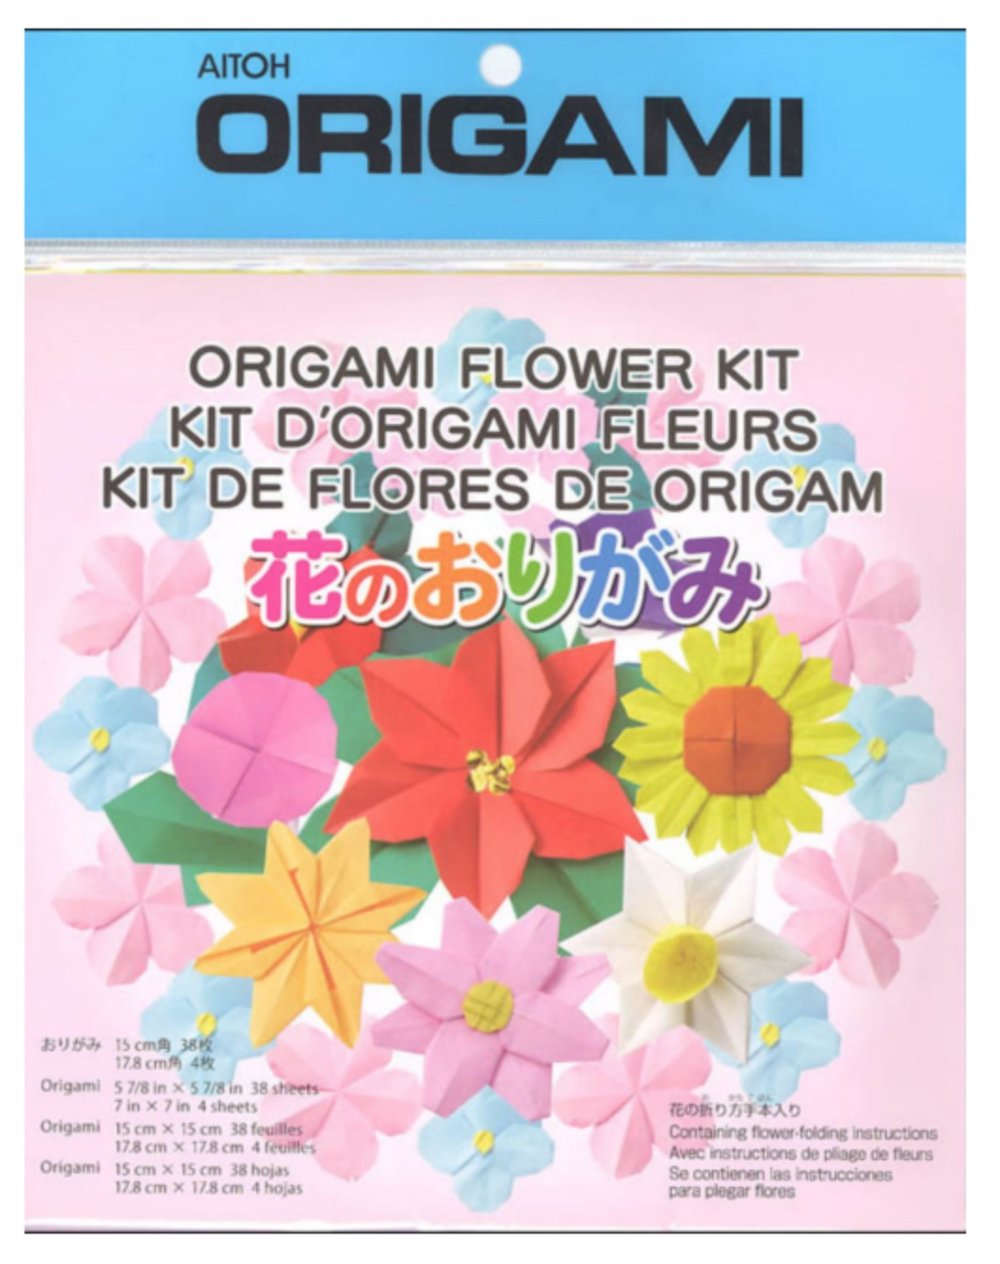 Aitoh Origami Paper 5-7/8x5-7/8 38 Sheets Flower Kit